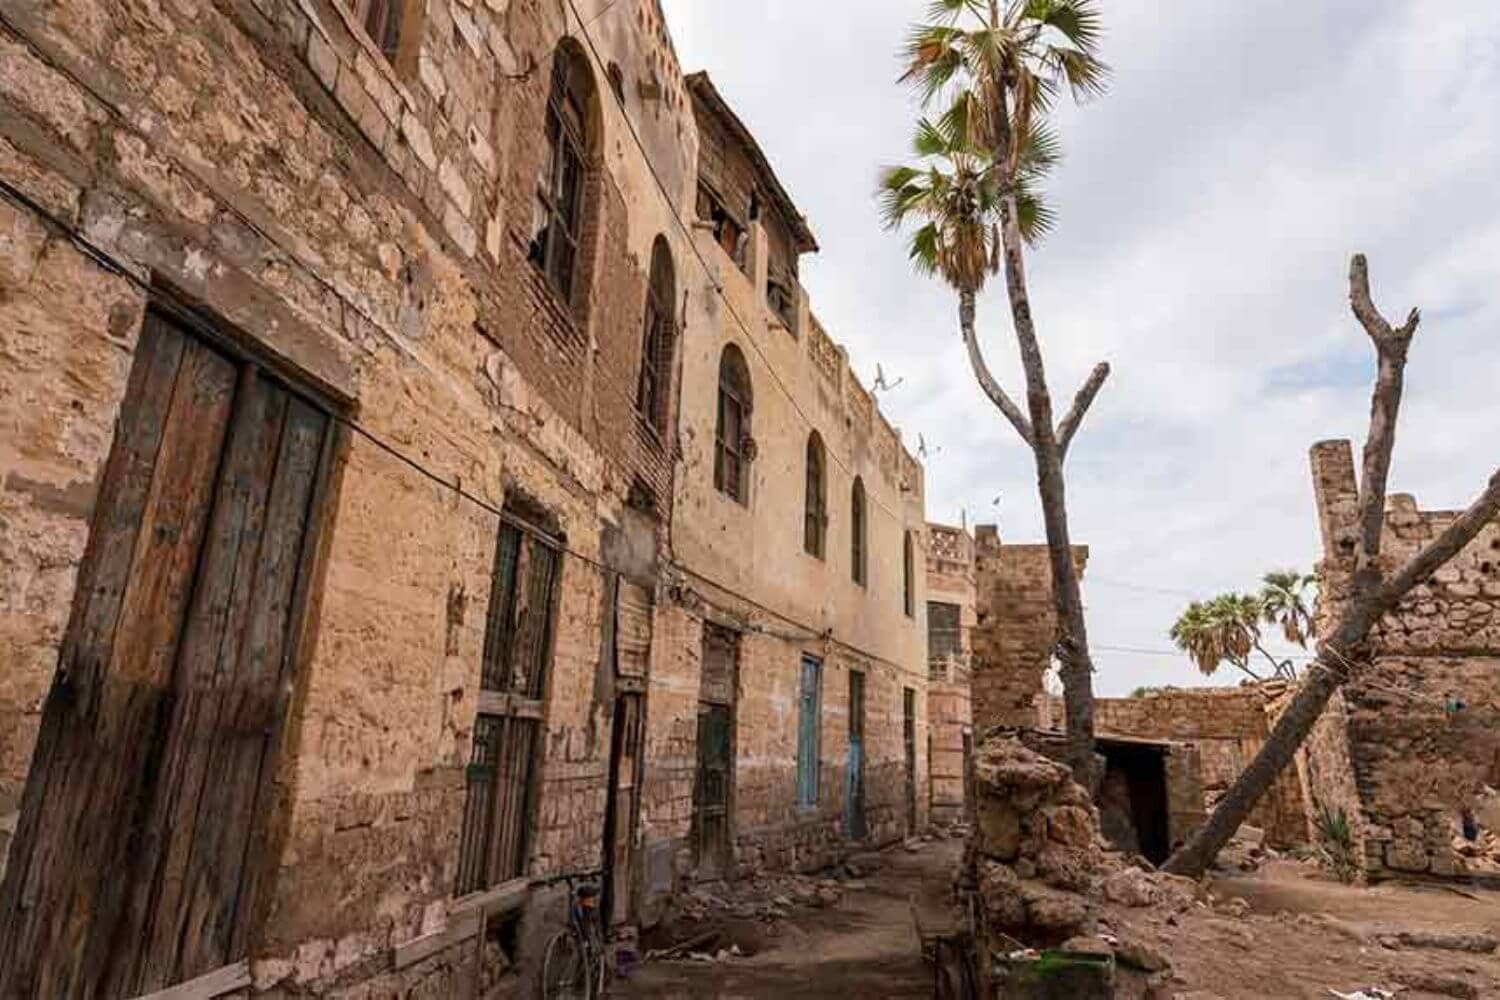 One of the old buildings Massawa